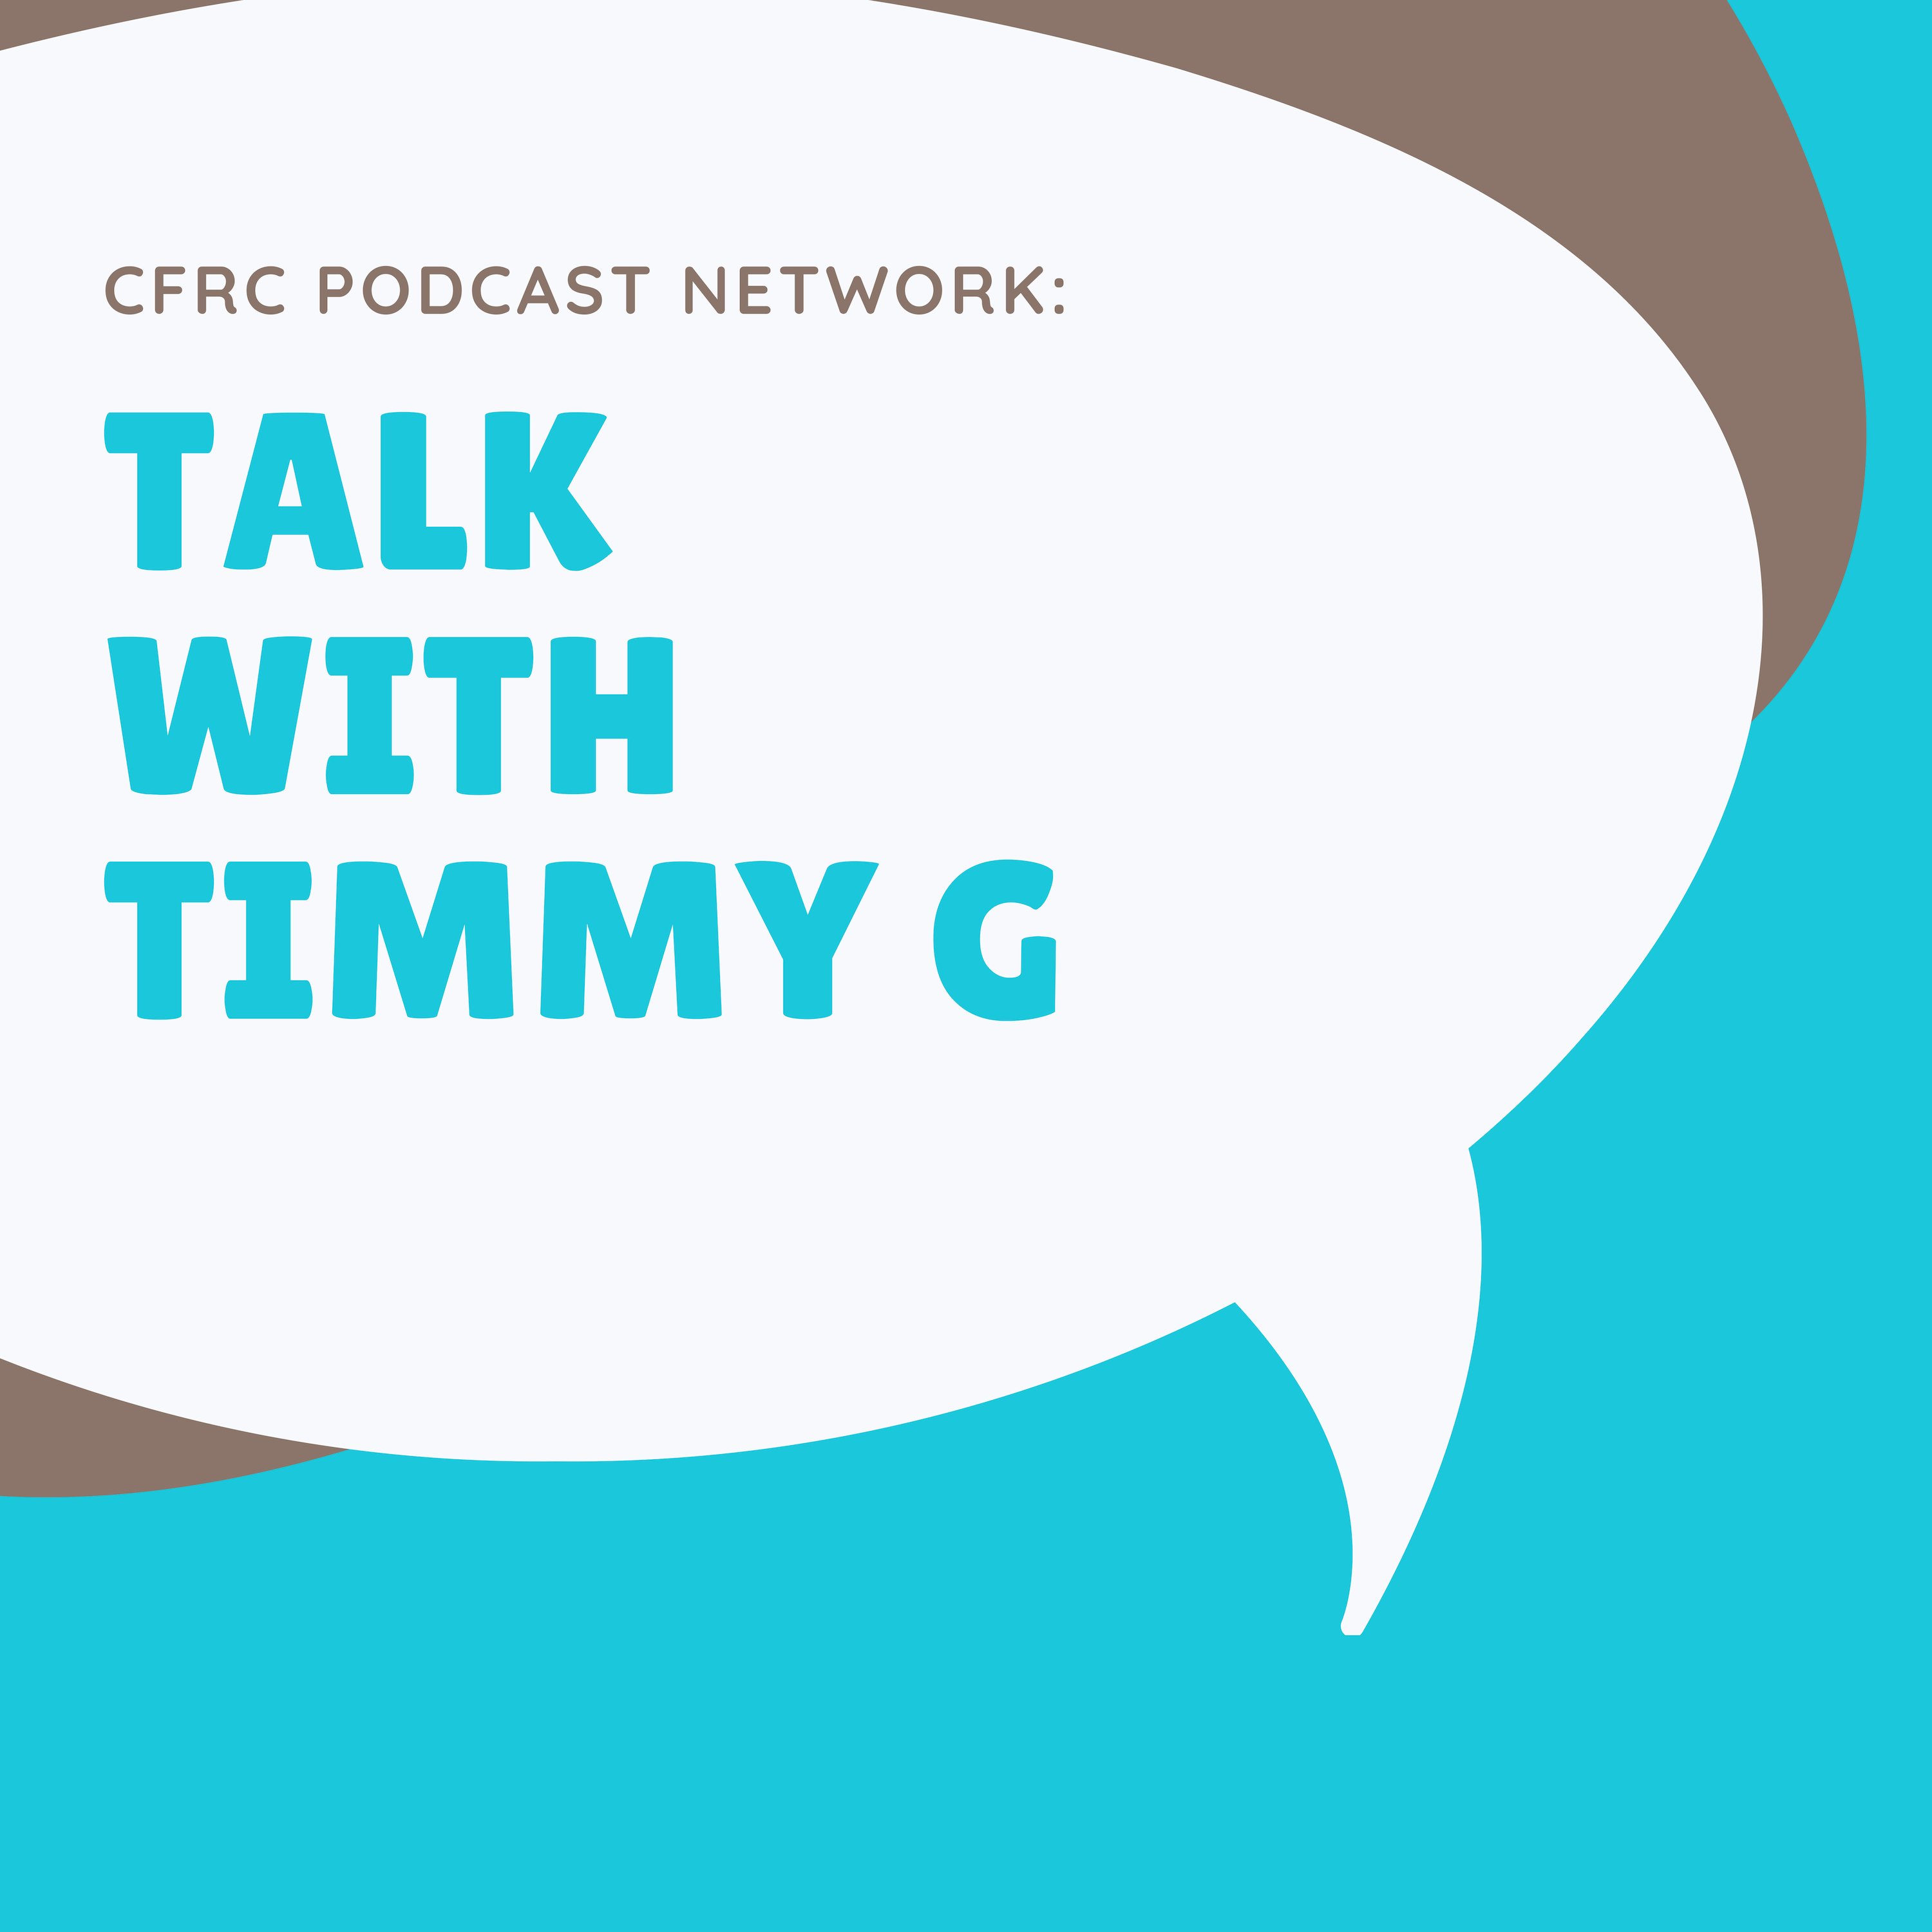 TALK with Timmy G